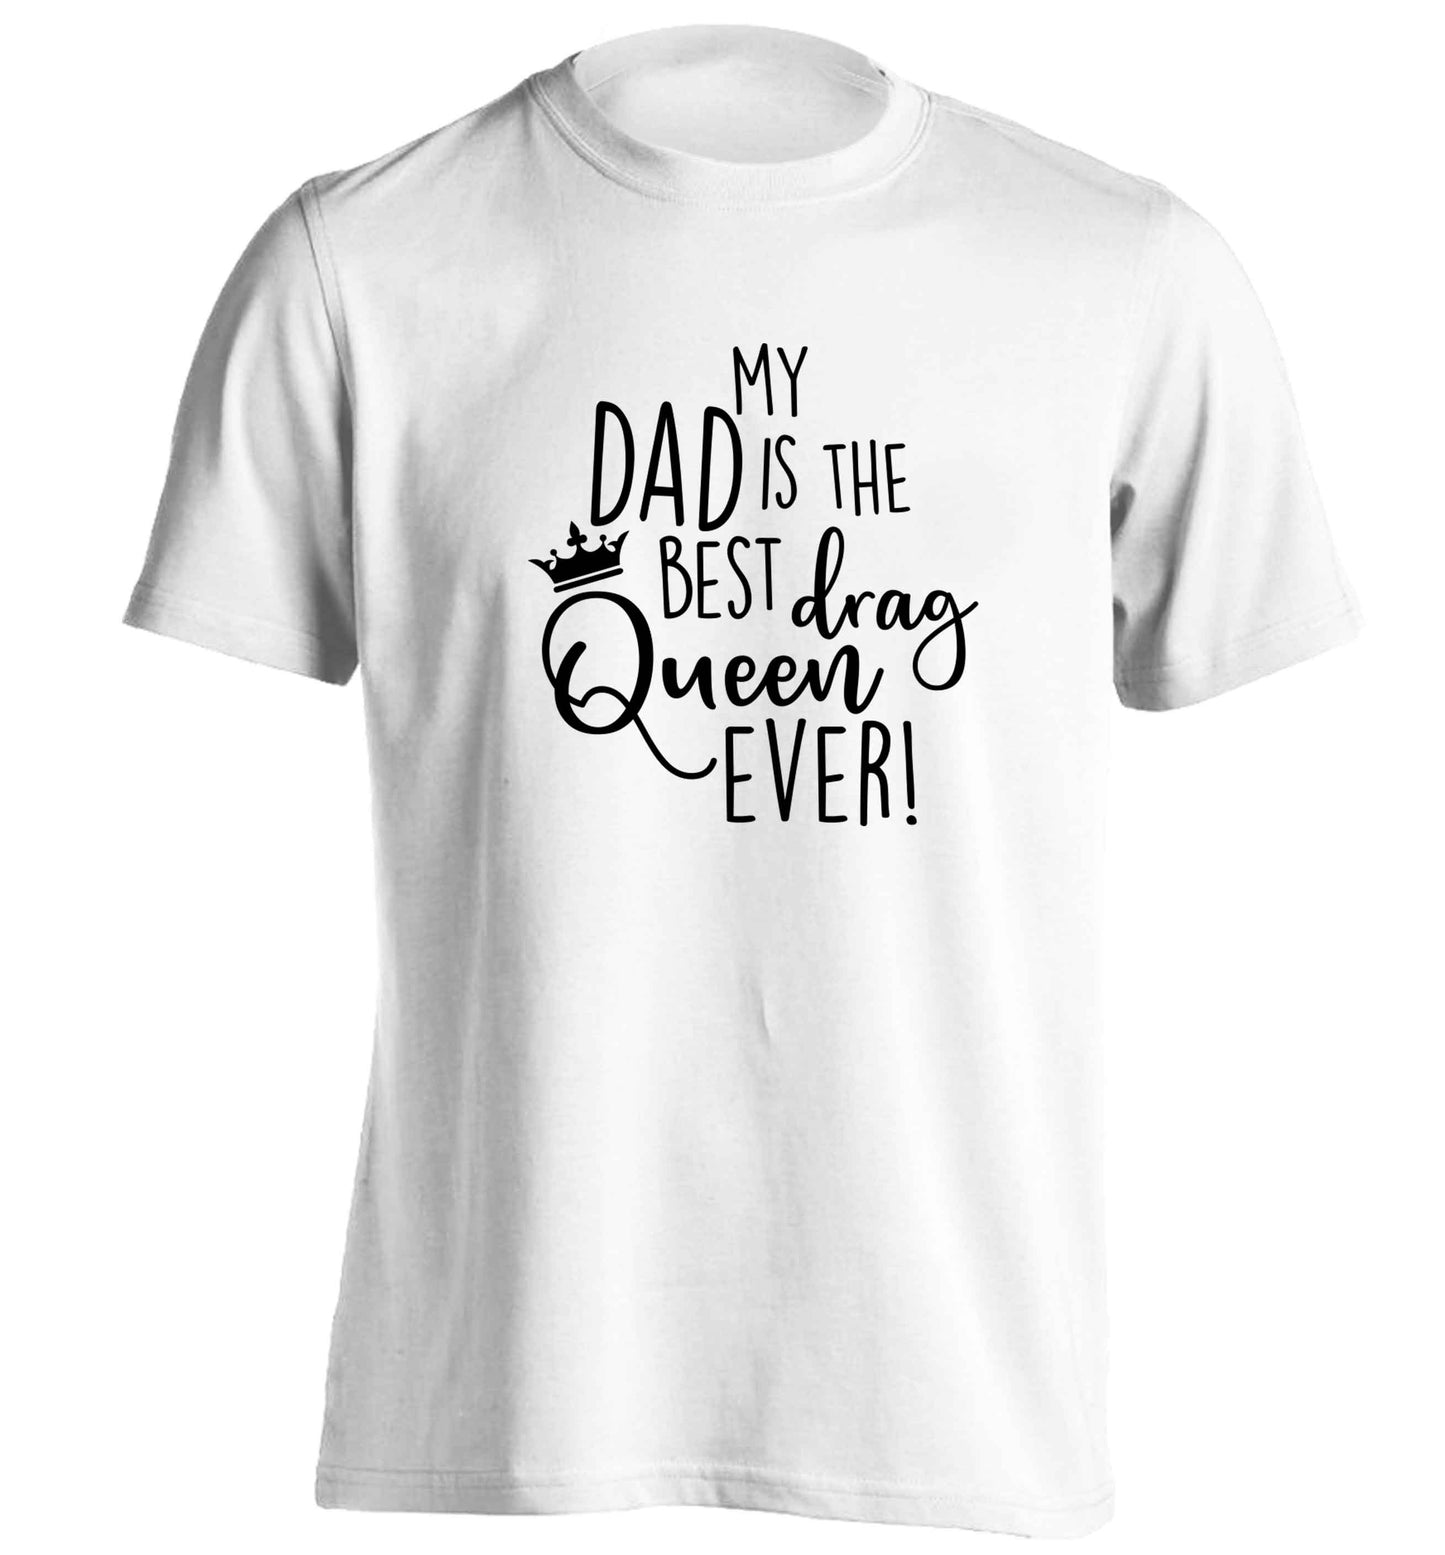 My dad is the best drag Queen ever adults unisex white Tshirt 2XL